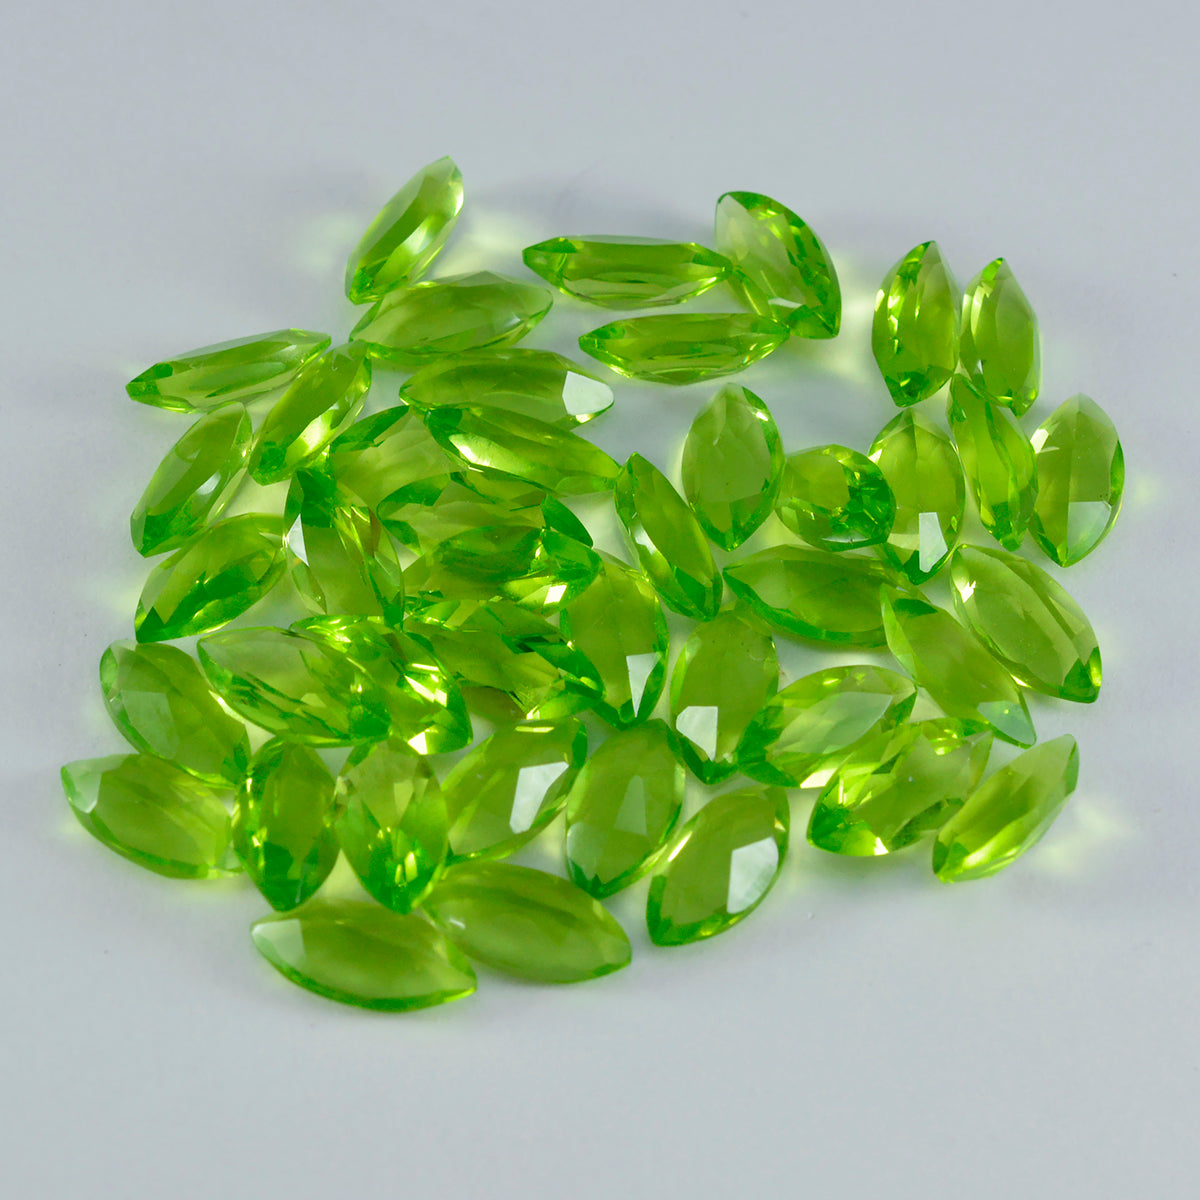 Riyogems 1PC Green Peridot CZ Faceted 4x8 mm Marquise Shape AAA Quality Loose Gem